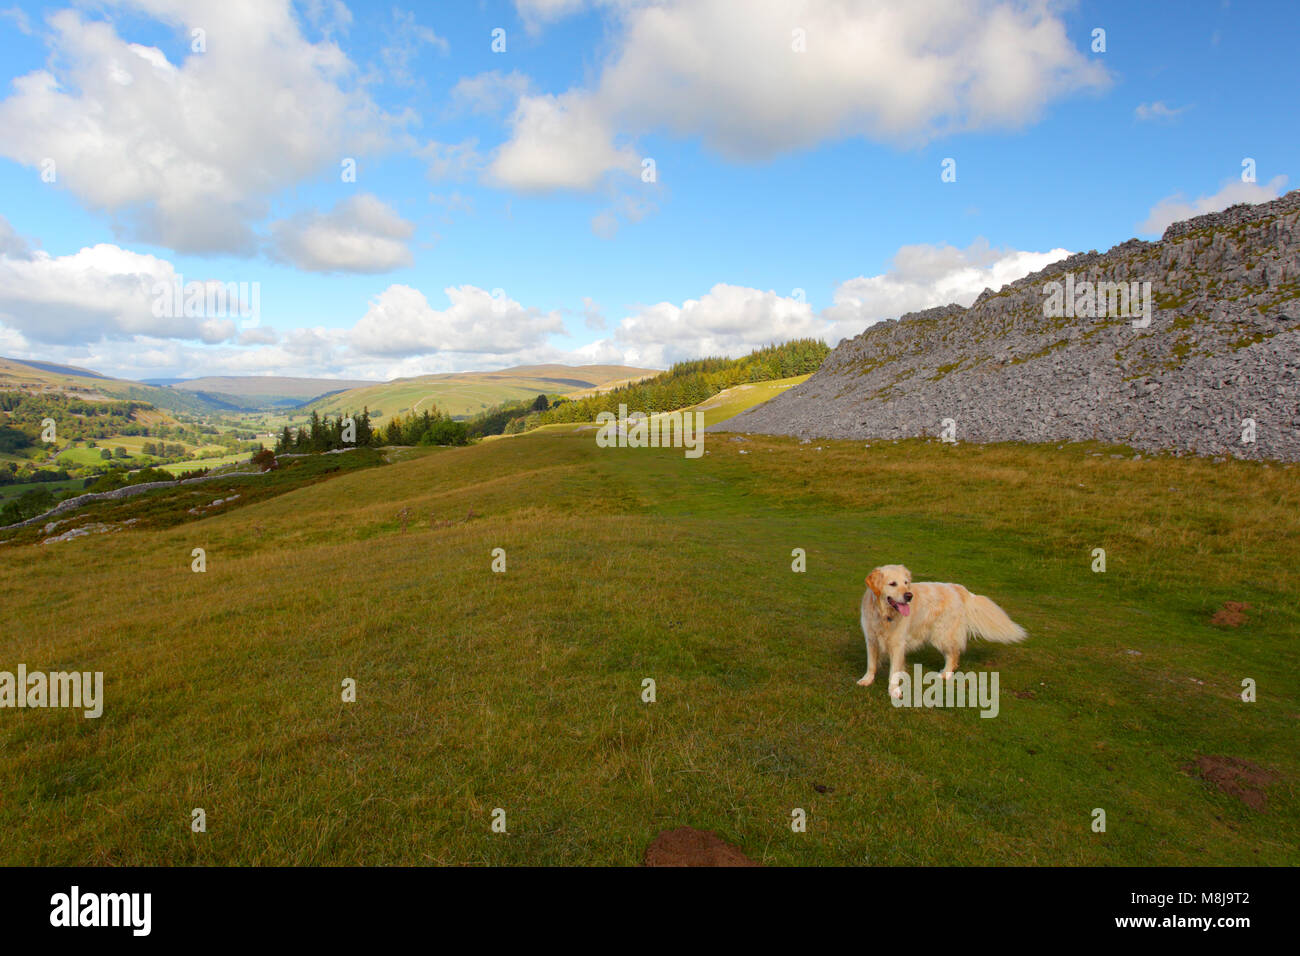 The view across Wharfedale, Yorkshire Dales National Park, North Yorkshire, England, with a Golden Retriever in the foreground Stock Photo